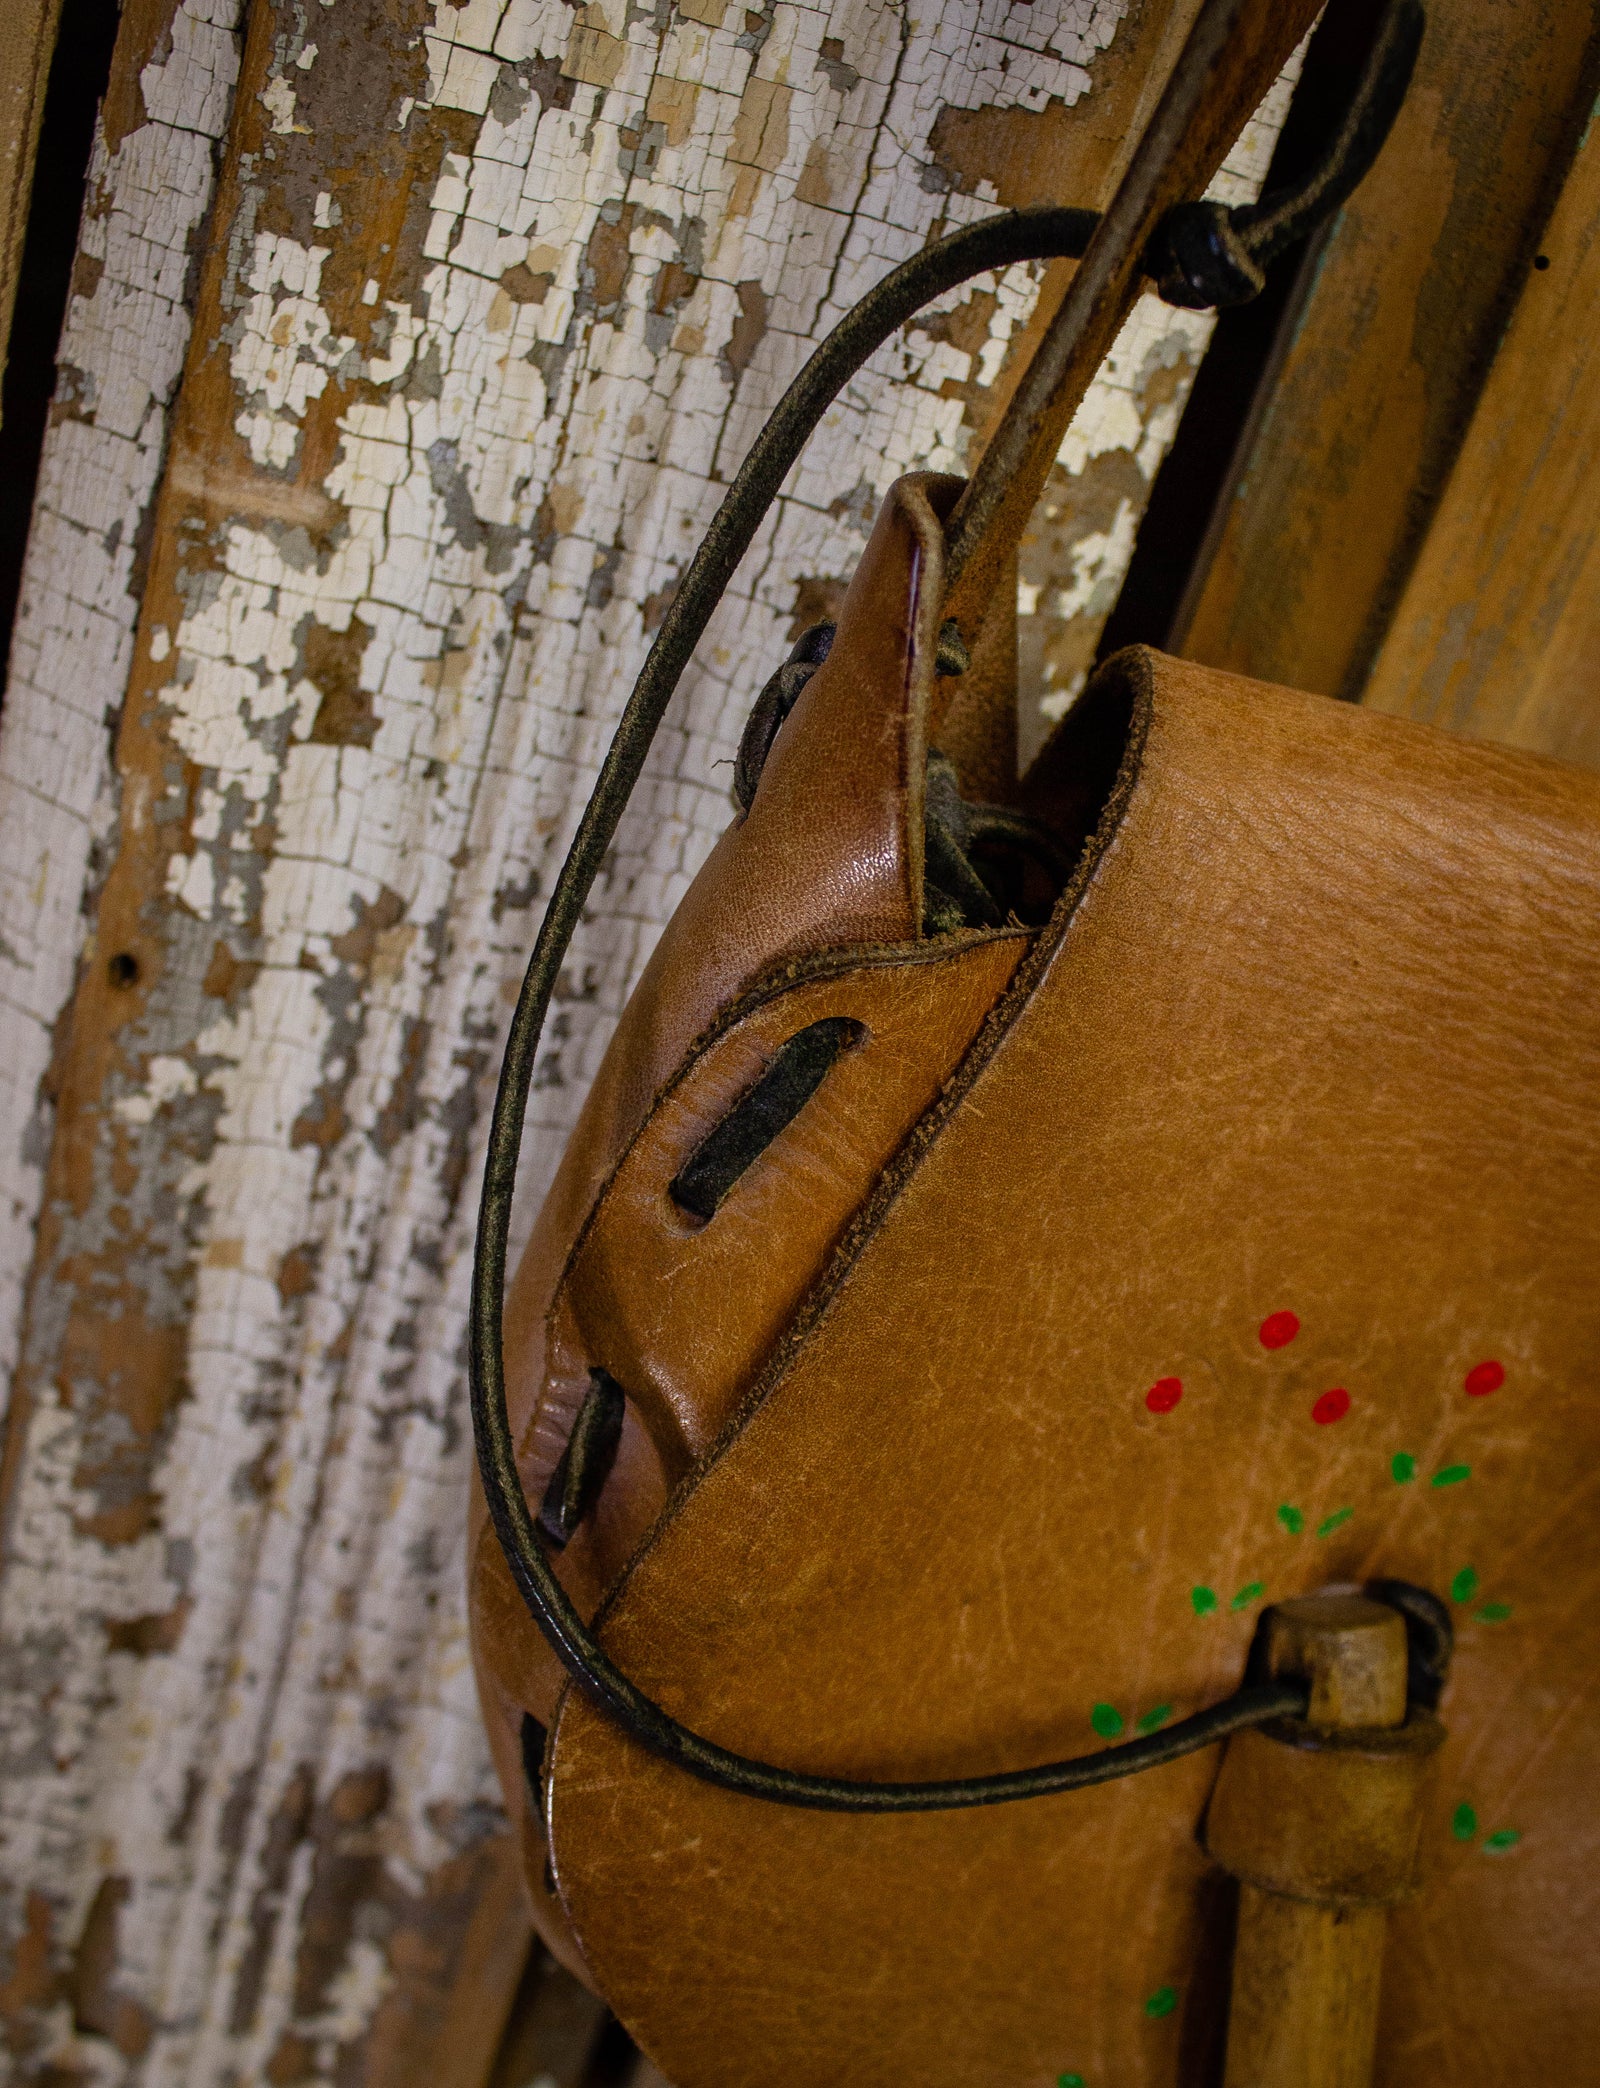 70s Floral Tooled Leather Bag 60s Flower Leather Satchel 